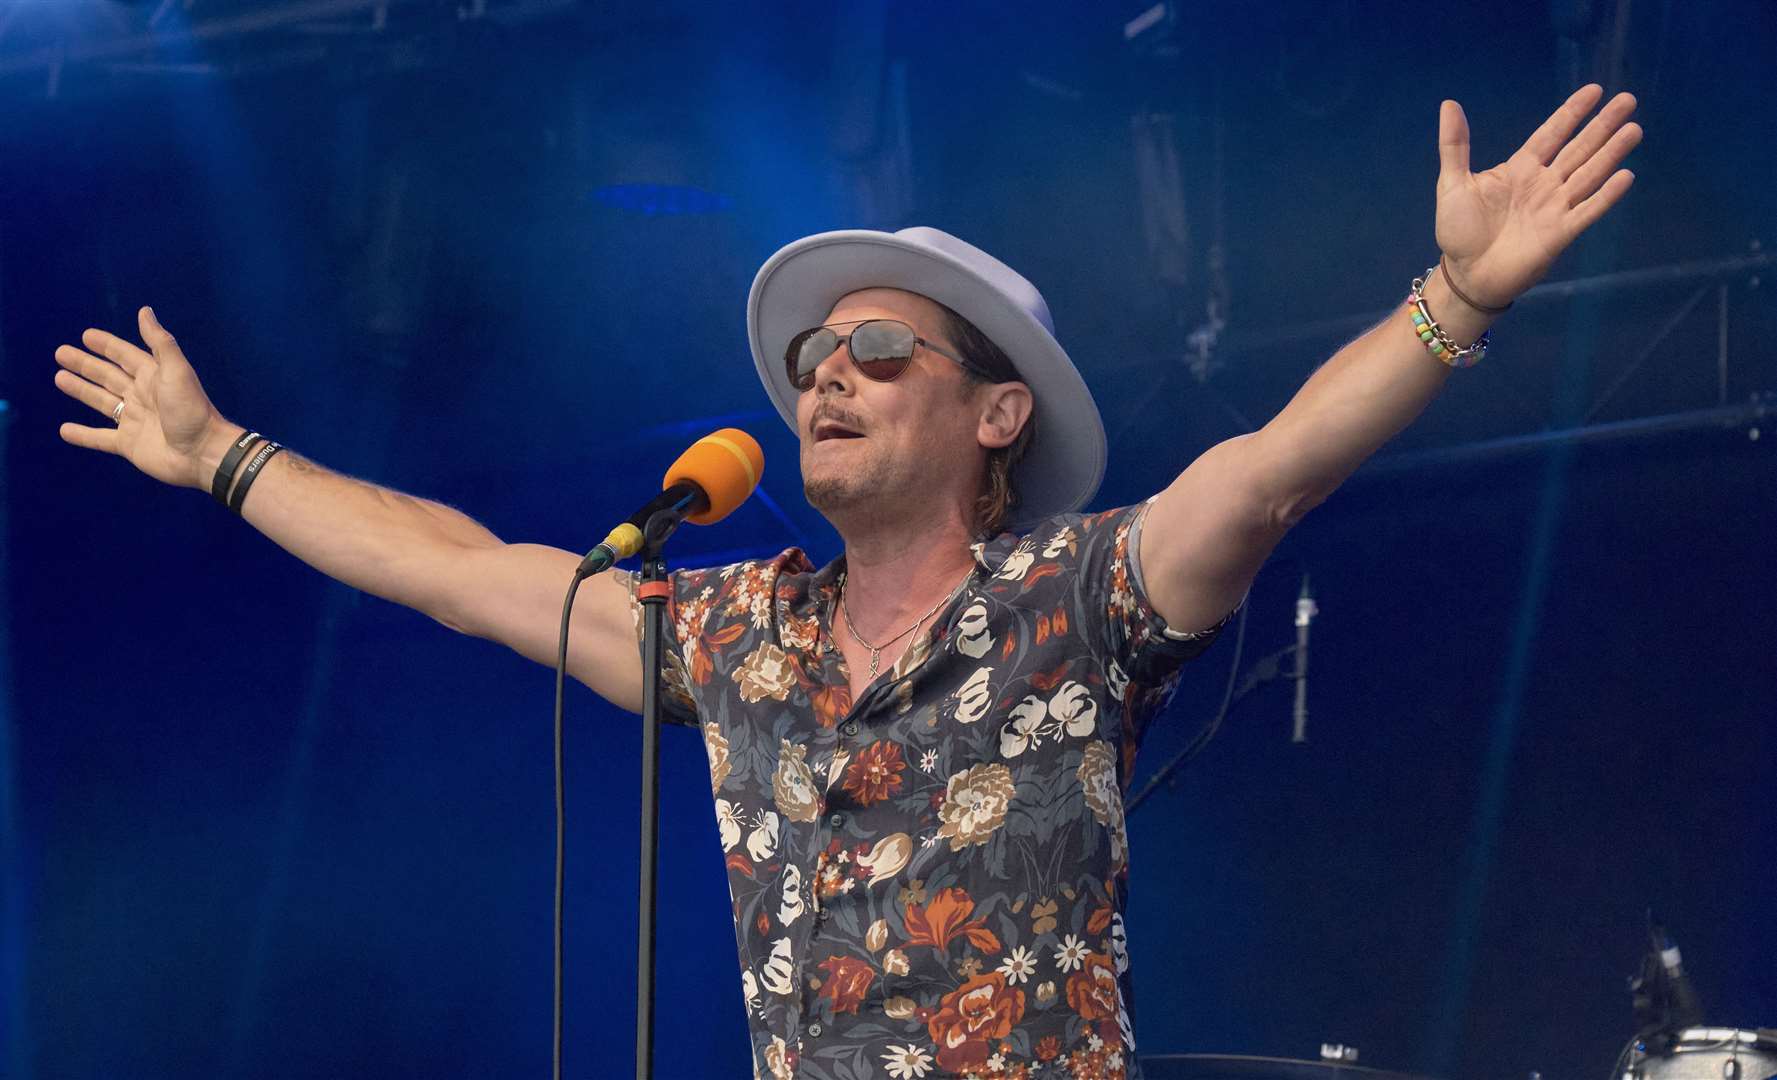 The Dualers will be supporting UB40 in June